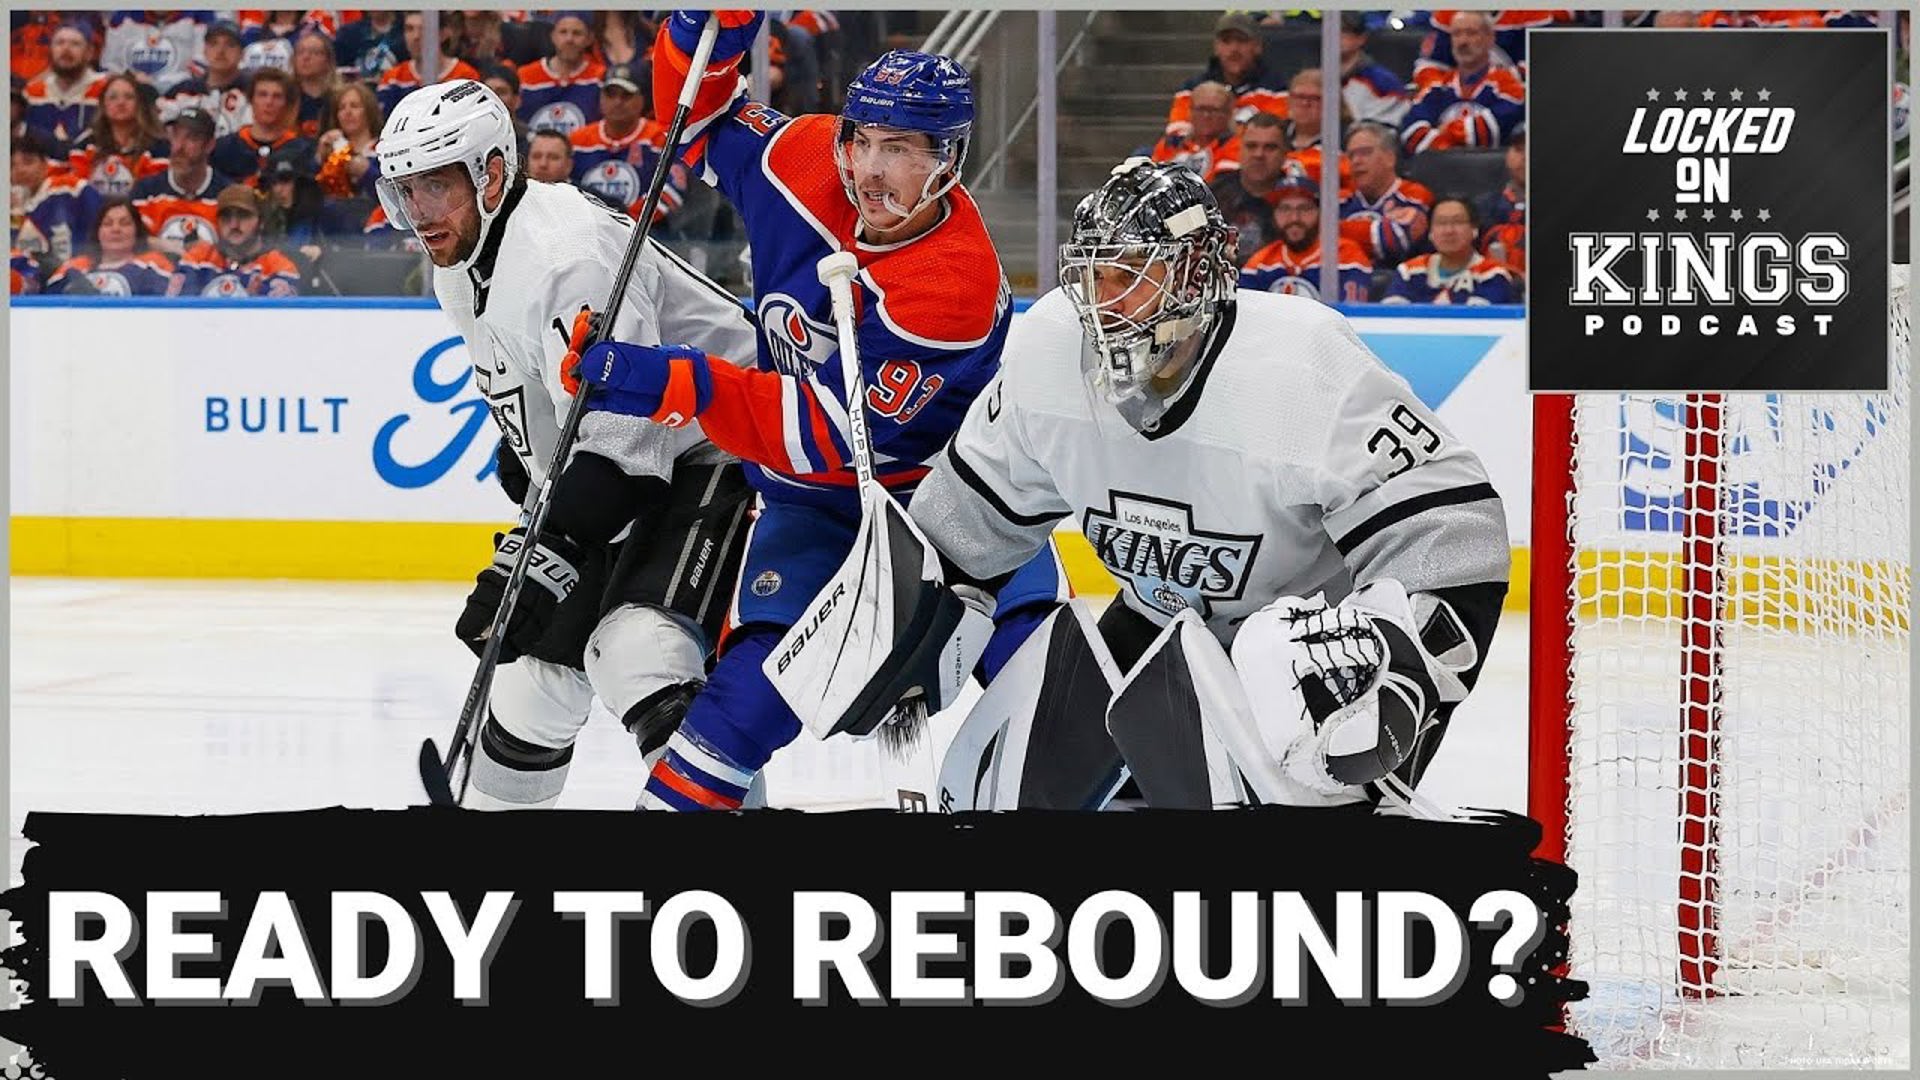 The Kings look to bounce back in Game 2 of the Stanley Cup Playoffs and Austin Stanovich of the Hockey News joins us to talk about Game 1, Game 2 and the near future